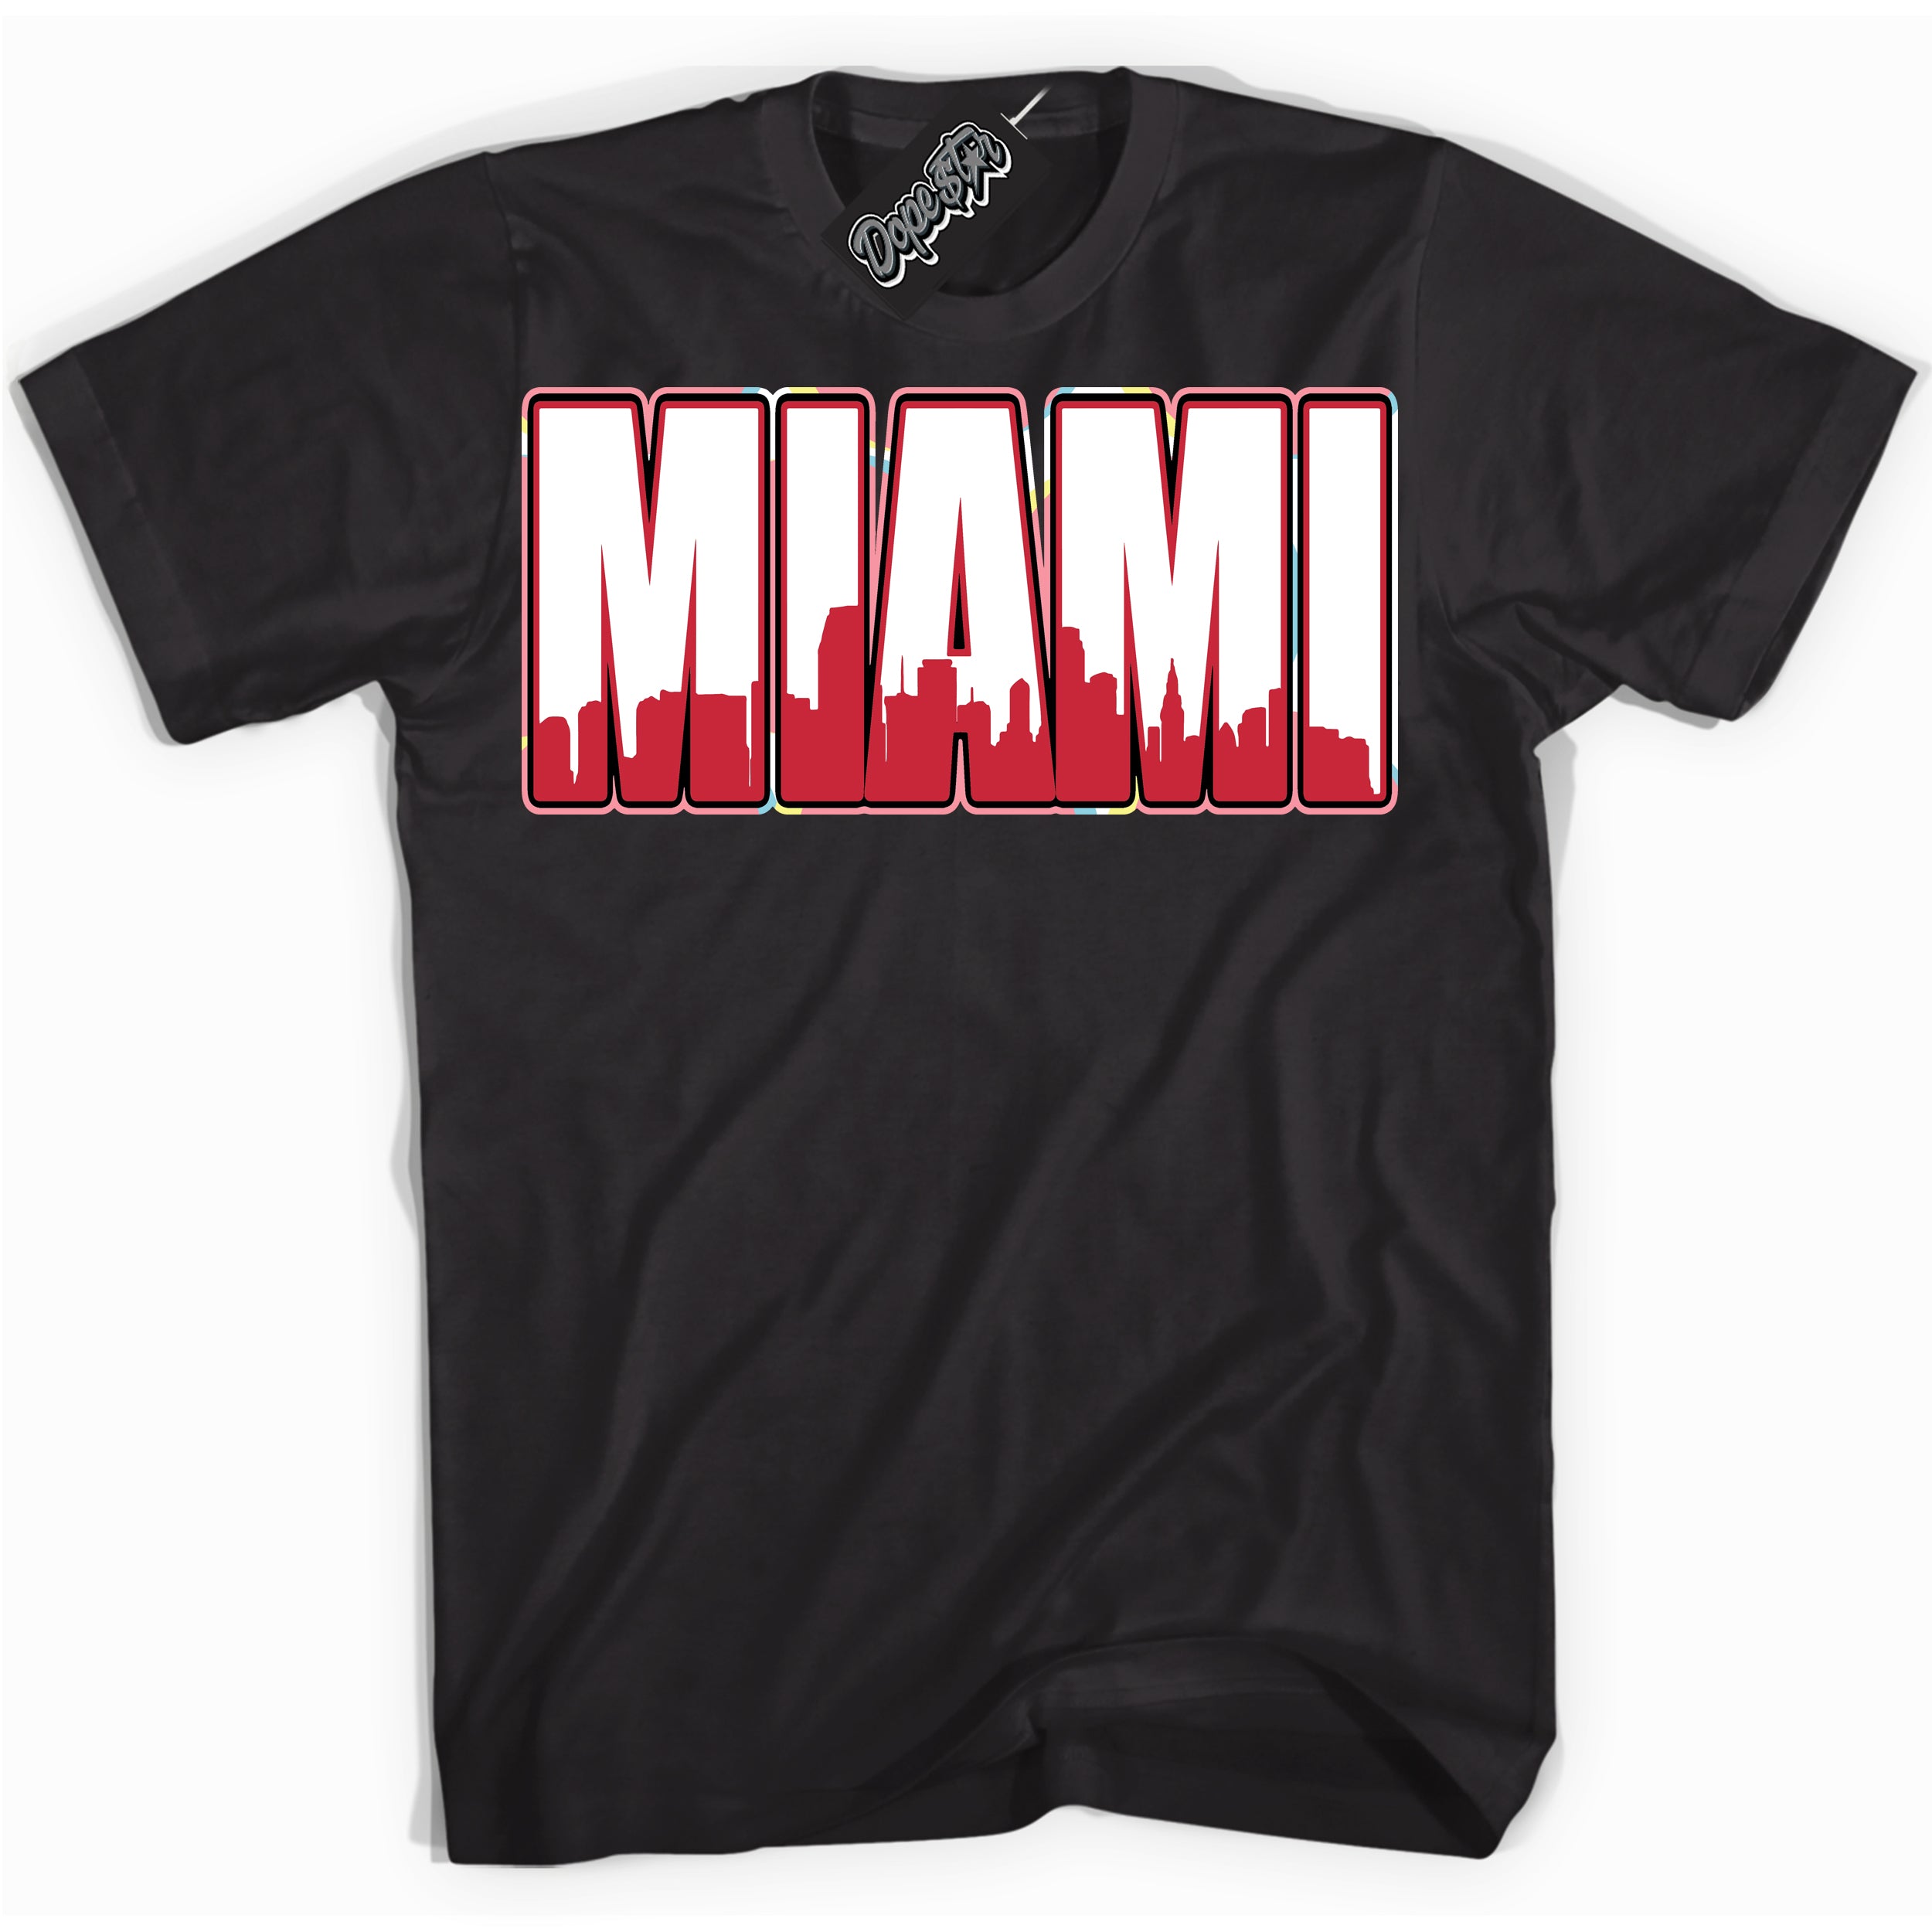 Cool Black graphic tee with “ Miami ” design, that perfectly matches Spider-Verse 1s sneakers 